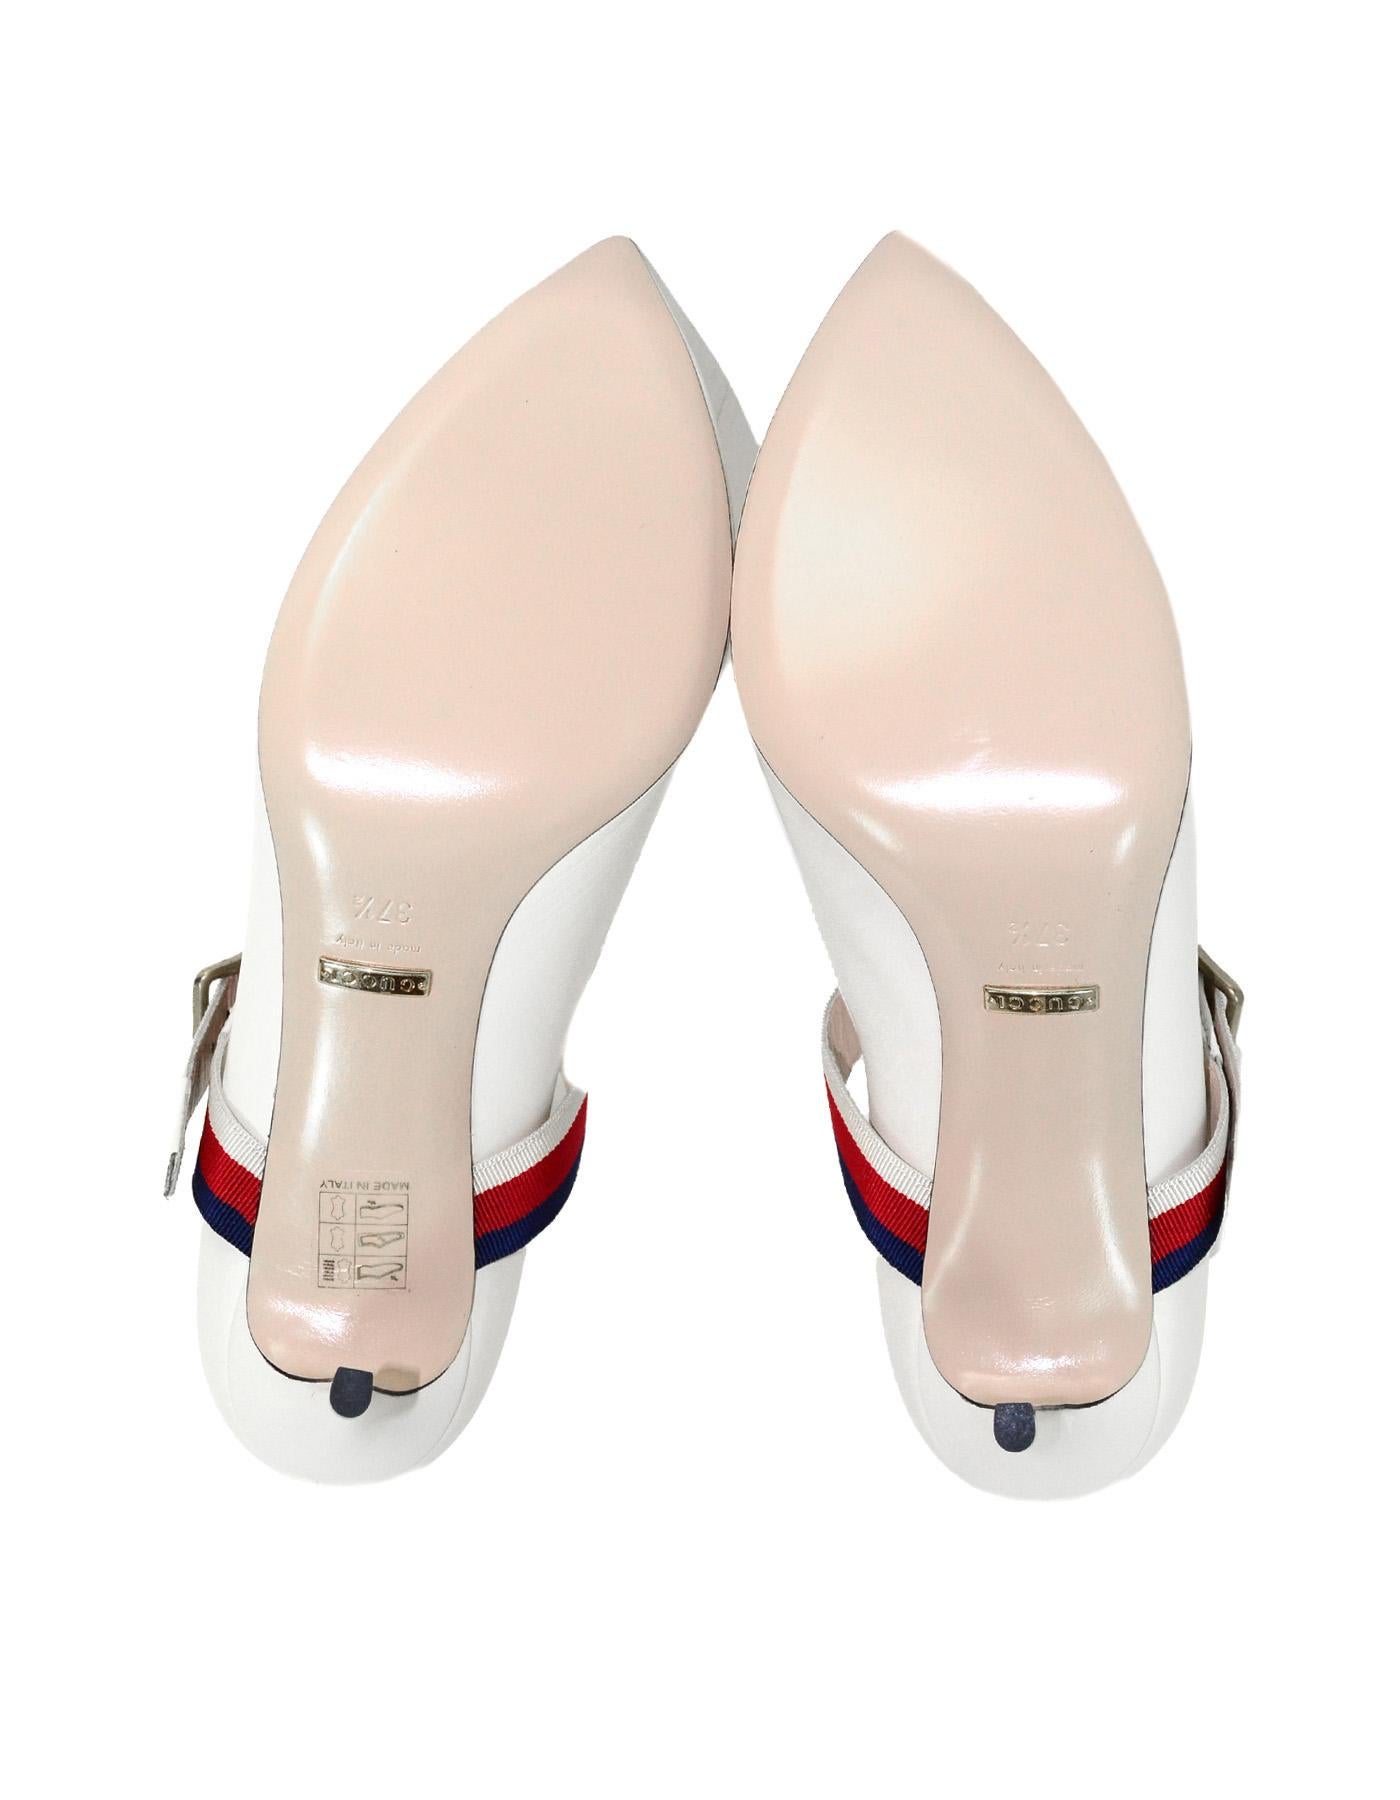 Gucci NEW White Leather Sylvie Pumps w. Red/Blue Grosgrain-Trimmed Web Sz 37.5 3